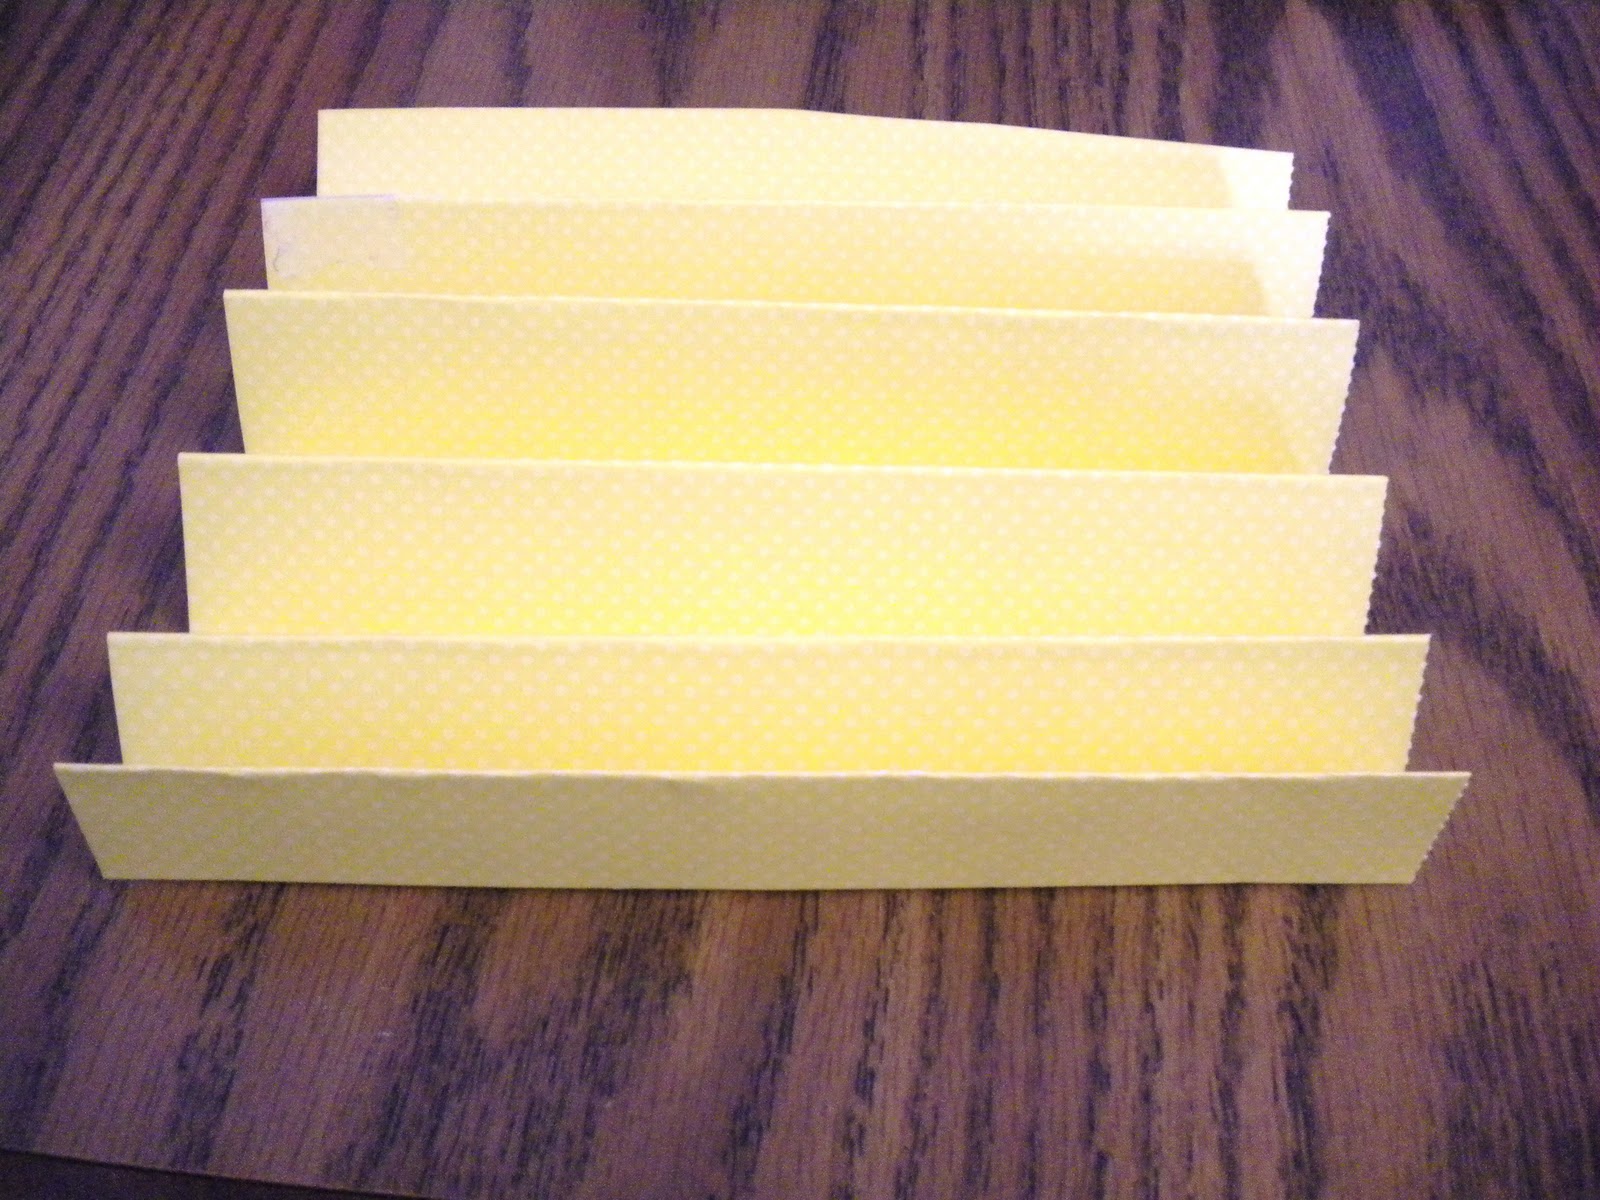 Step 3: Fold each piece of paper in half at the middle